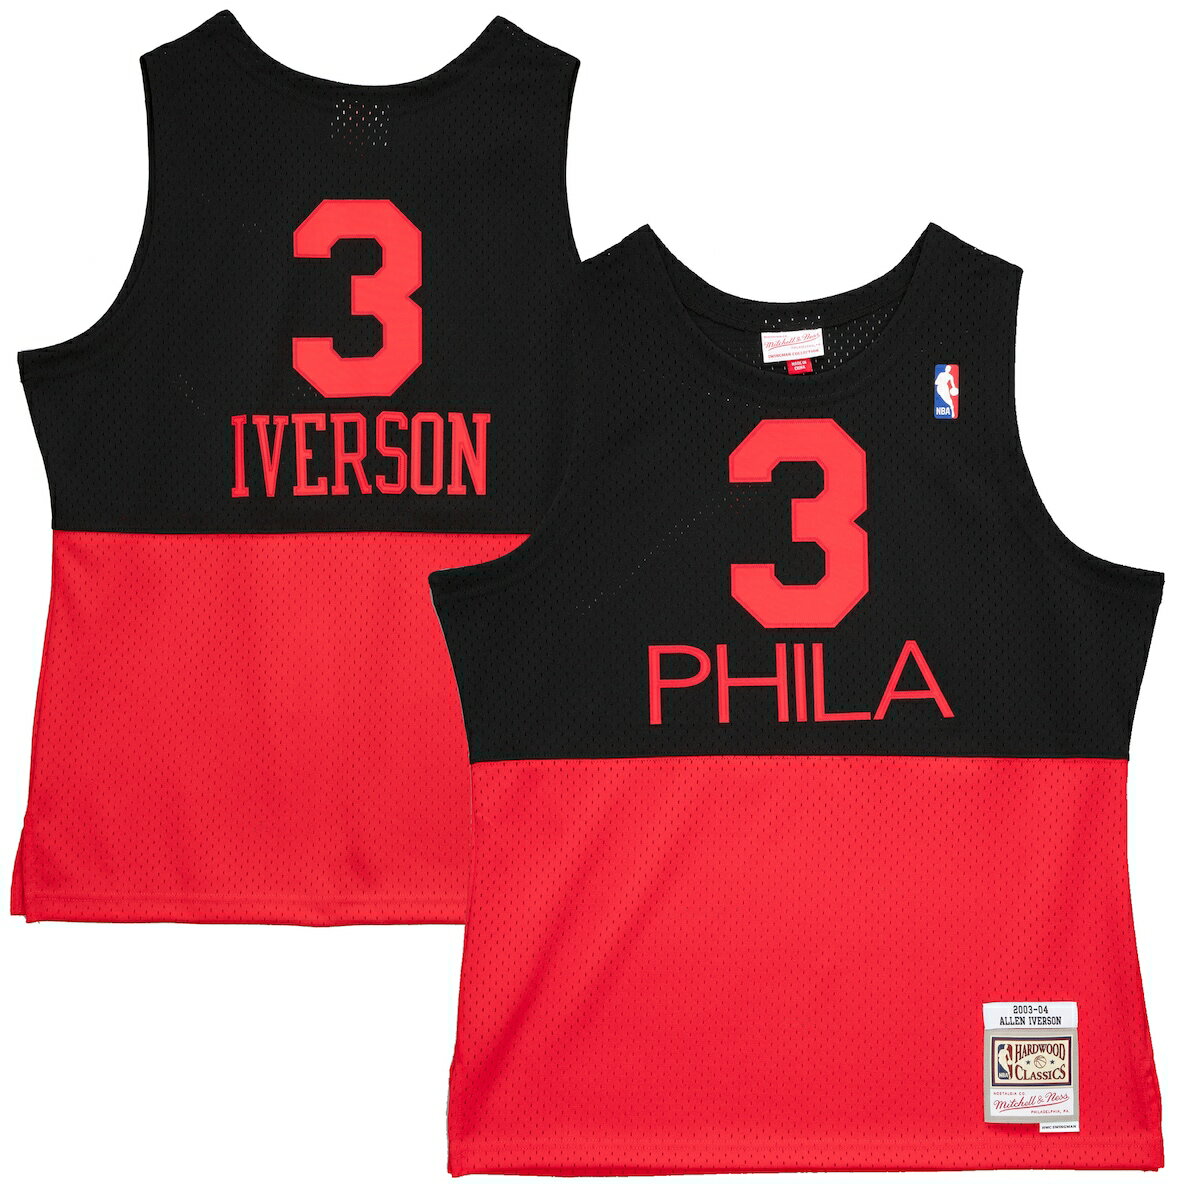 Get pumped up and ready for the next Philadelphia 76ers game with this Allen Iverson Mitchell & Ness 2003-2004 Hardwood Classics Reload 2.0 Swingman Jersey. This sweet gear features bold Philadelphia 76ers and Allen Iverson graphics that are sure to grab the attention of fellow fans. Pair this top with your favorite Philadelphia 76ers hat and you'll have the ultimate game day look!Officially licensedWoven graphicsMaterial: 100% PolyesterWoven jock tag above hemSwingman ThrowbackHeat Sealed fabric appliqueSublimated graphicsSide splitsImportedSleevelessBrand: Mitchell & NessMesh fabricMachine wash, line dryCrew neckRib-knit collar and armholes